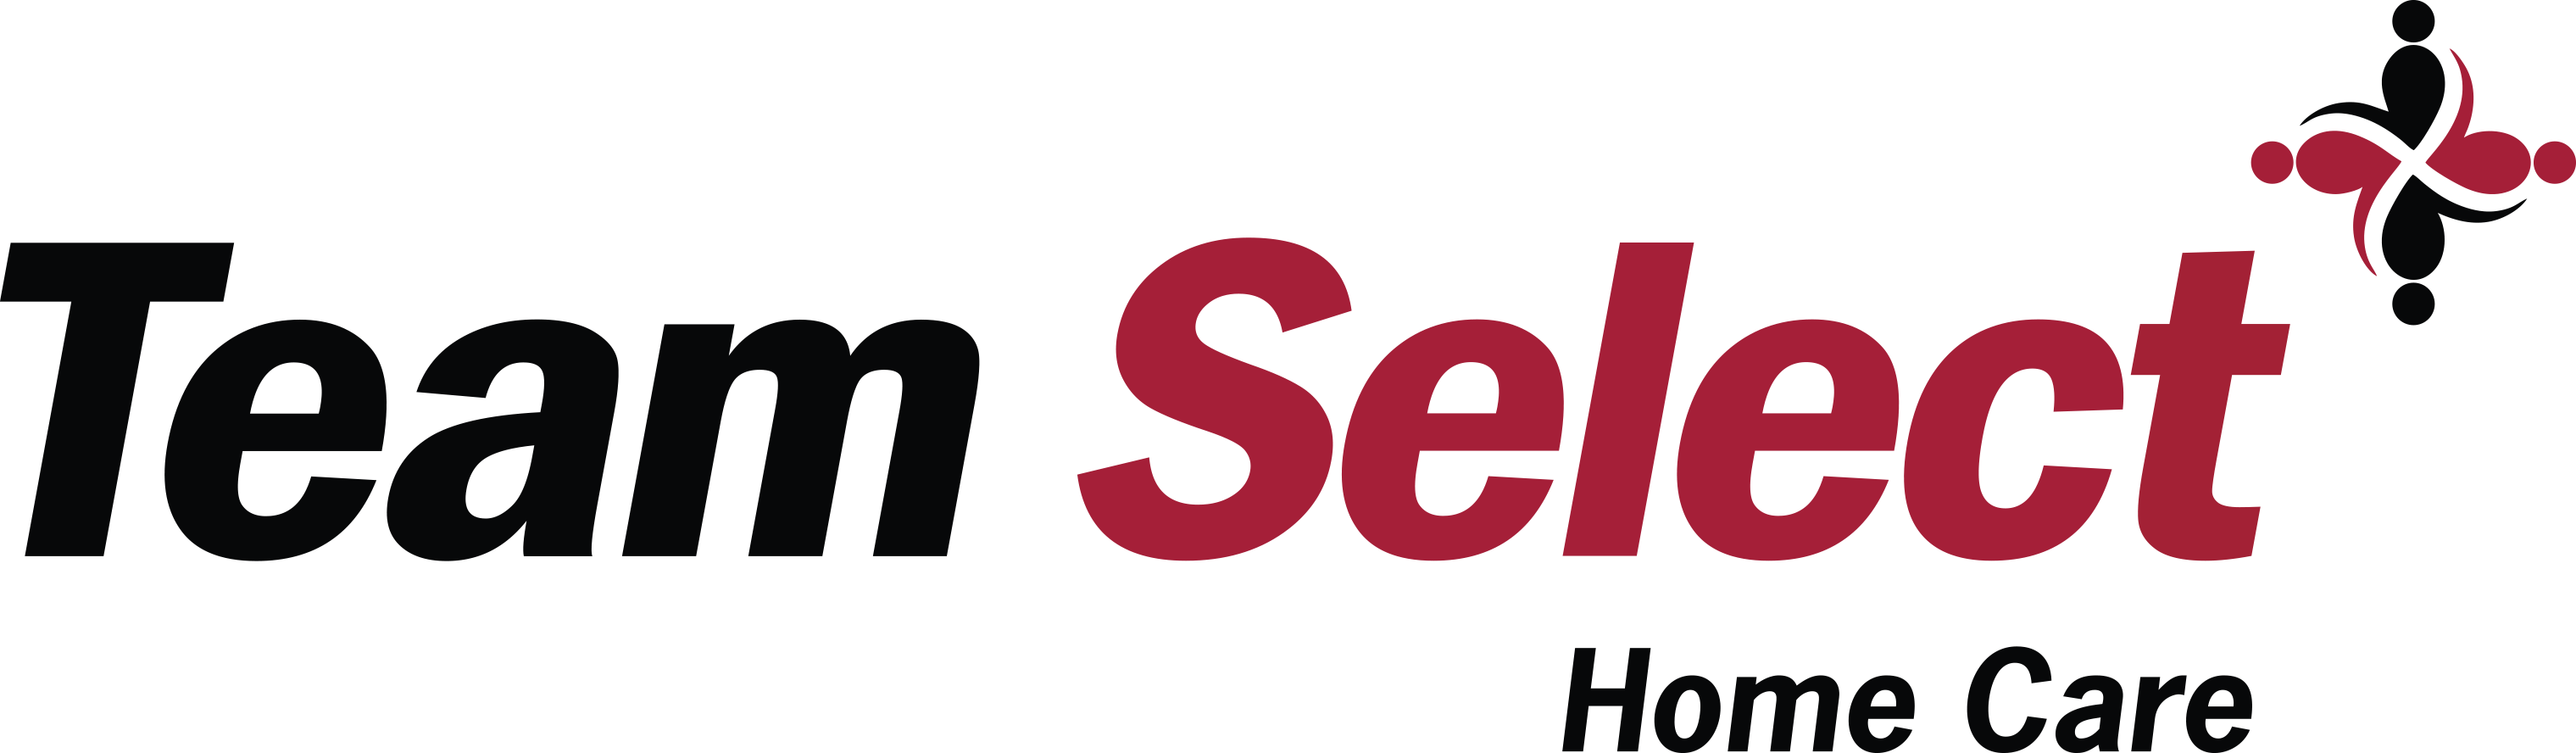 Tenex Capital Management Completes Sale of Team Select Home Care 